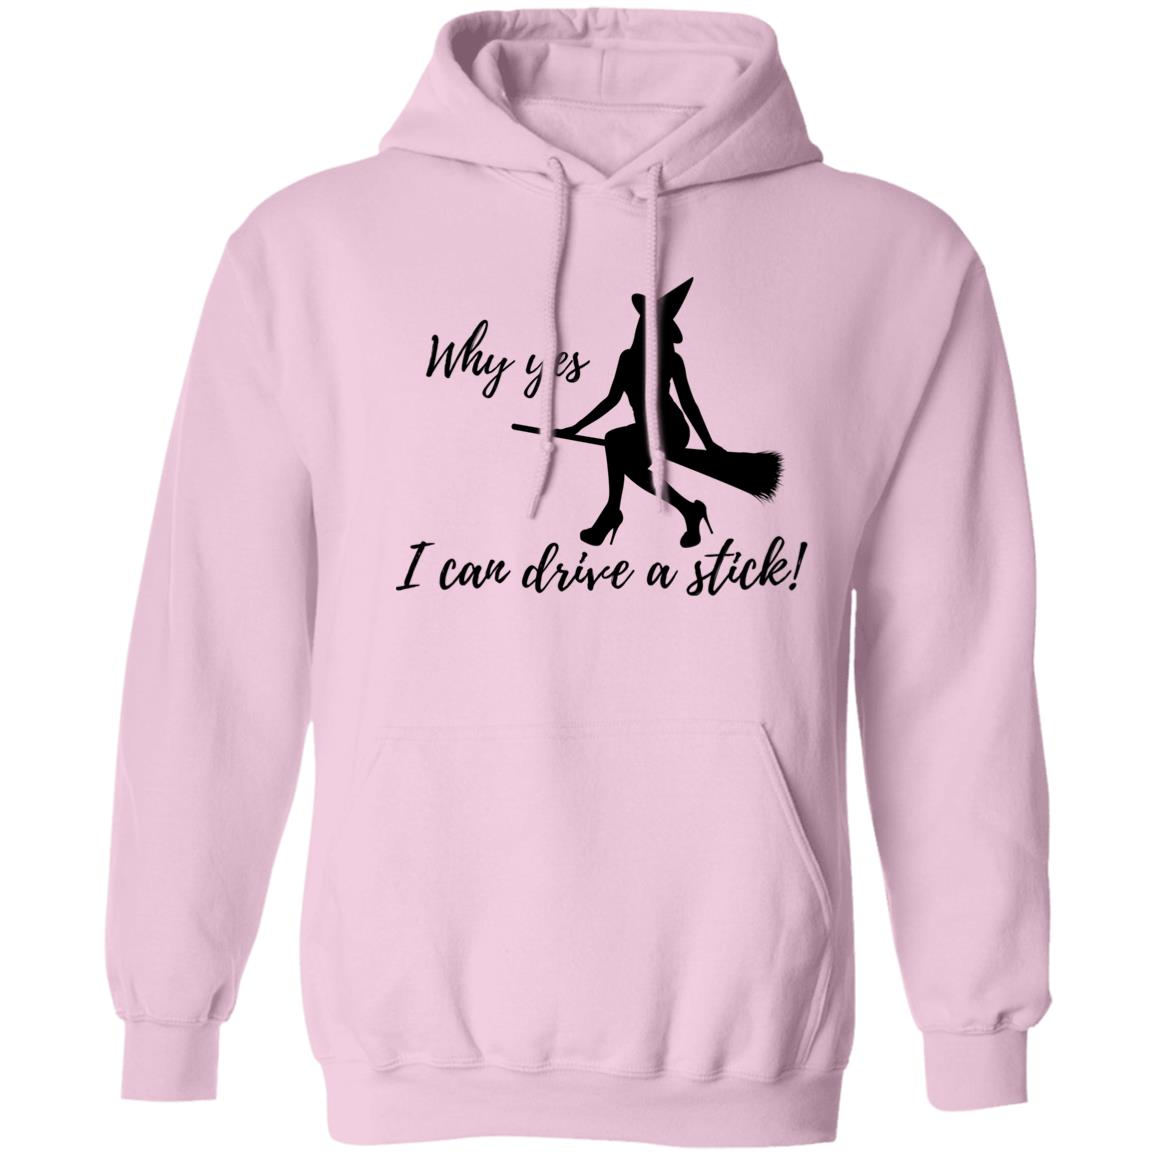 I can Drive a Stick - Halloween -Z66x Pullover Hoodie